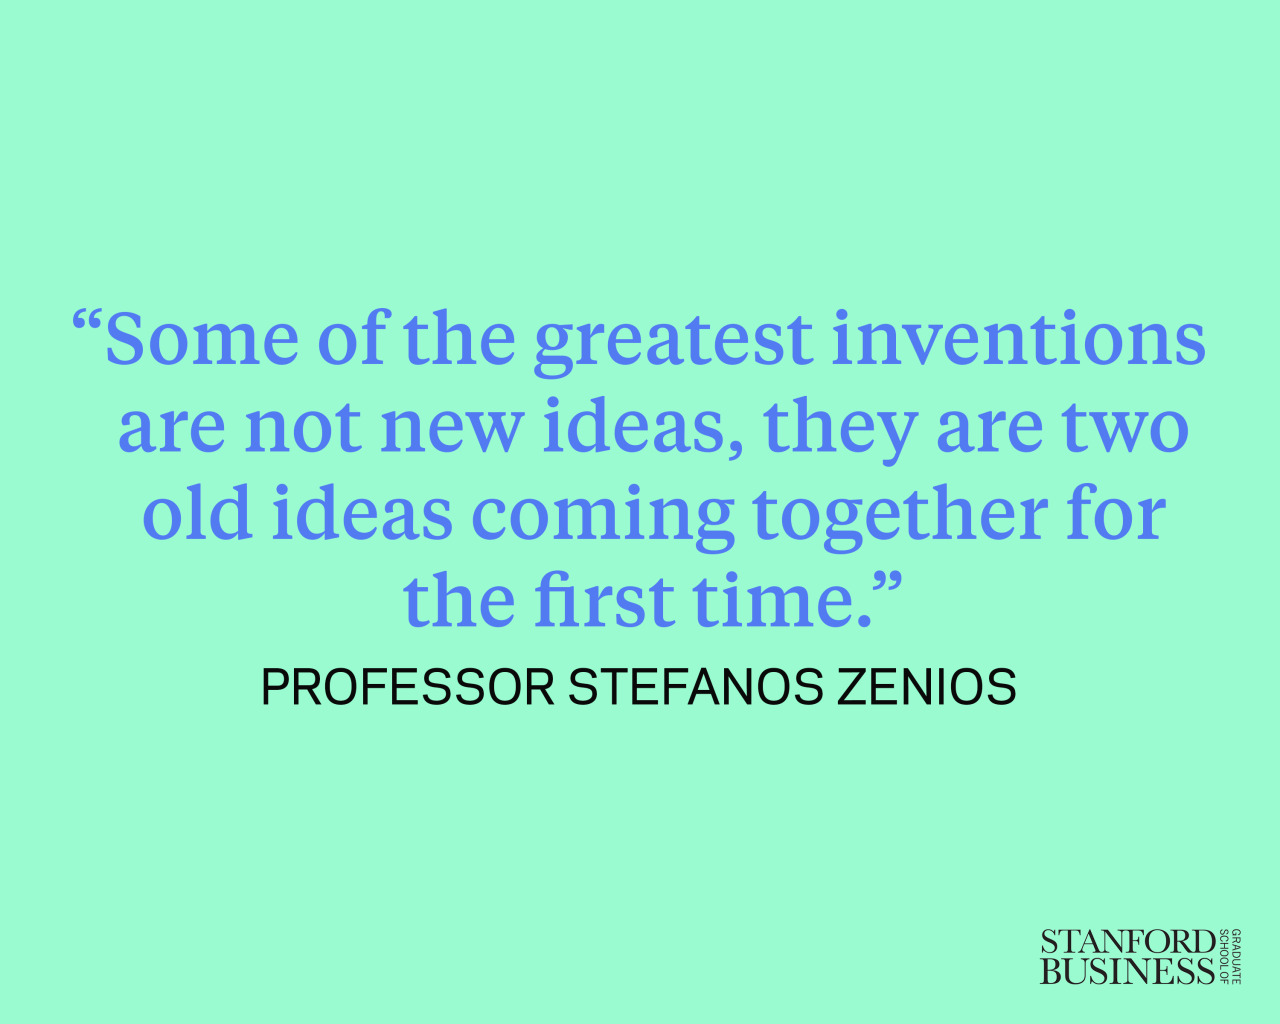 stanfordbusiness:
“Entrepreneurs don’t need to disrupt an industry in order to create a successful product or service. Professor Stefanos Zenios believes the most successful innovations build incrementally on existing ideas. Read the full Fast...